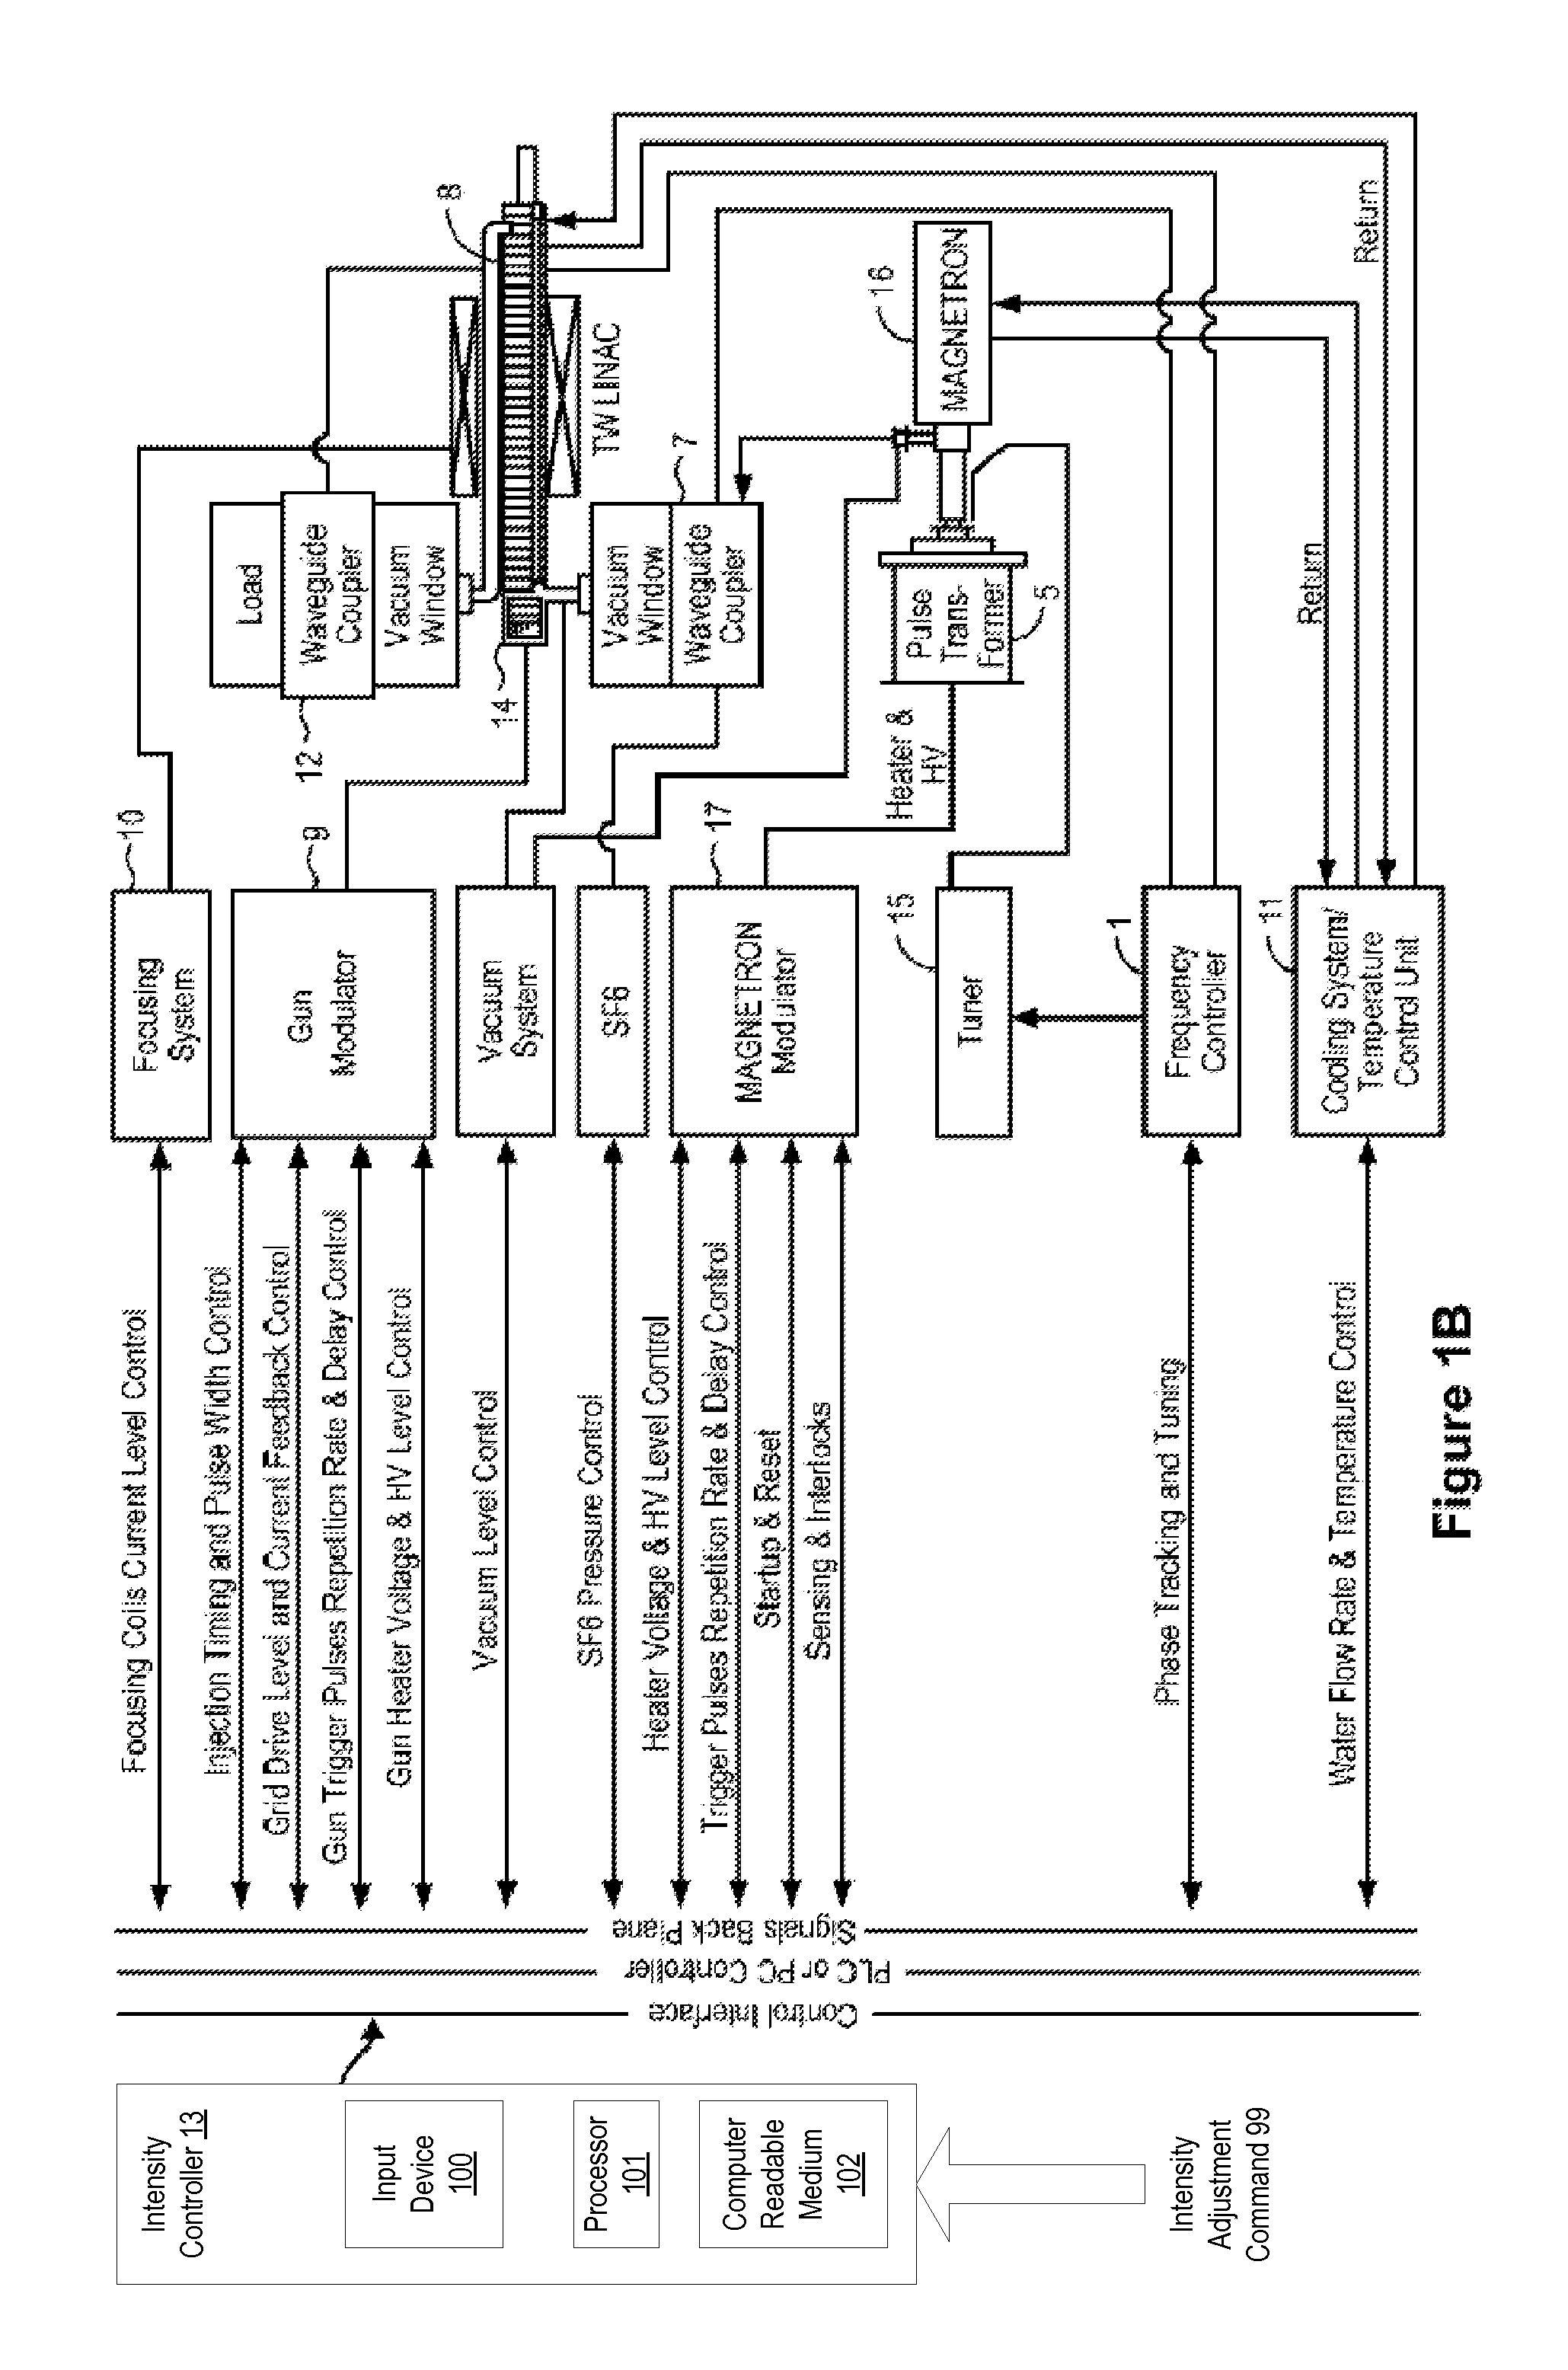 Traveling wave linear accelerator based x-ray source using pulse width to modulate pulse-to-pulse dosage